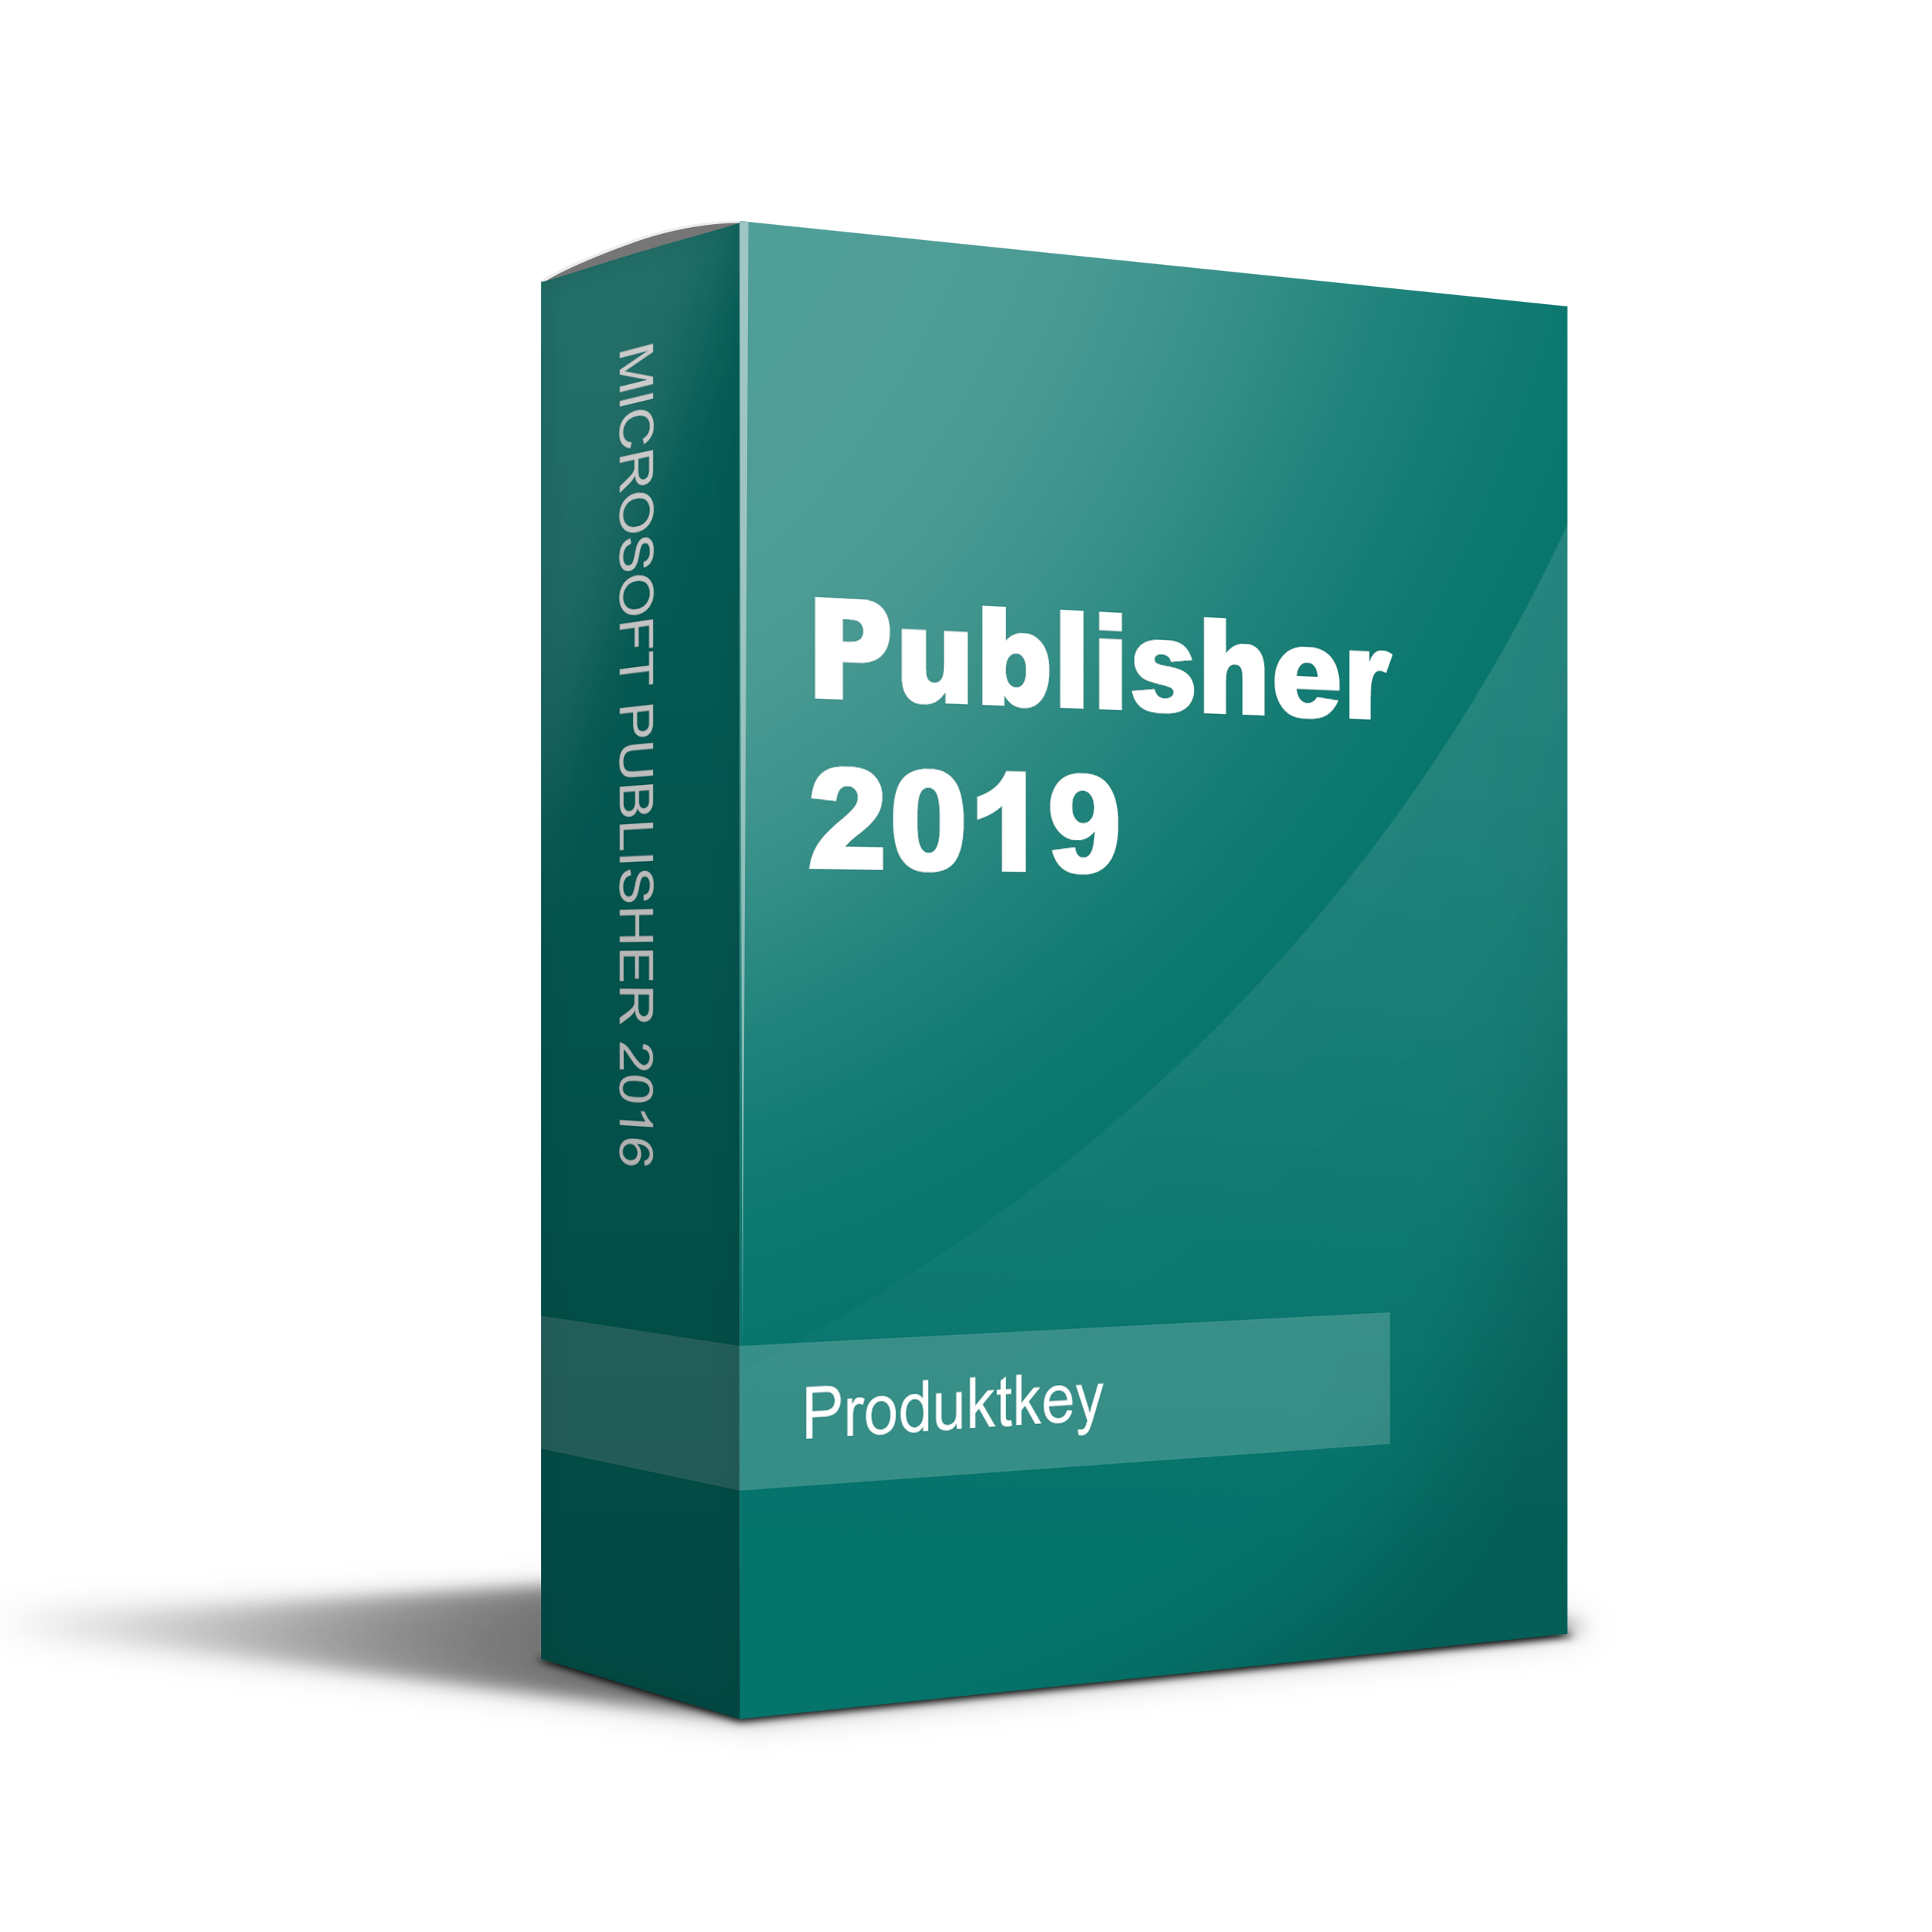 microsoft publisher 2019 free download for windows 10